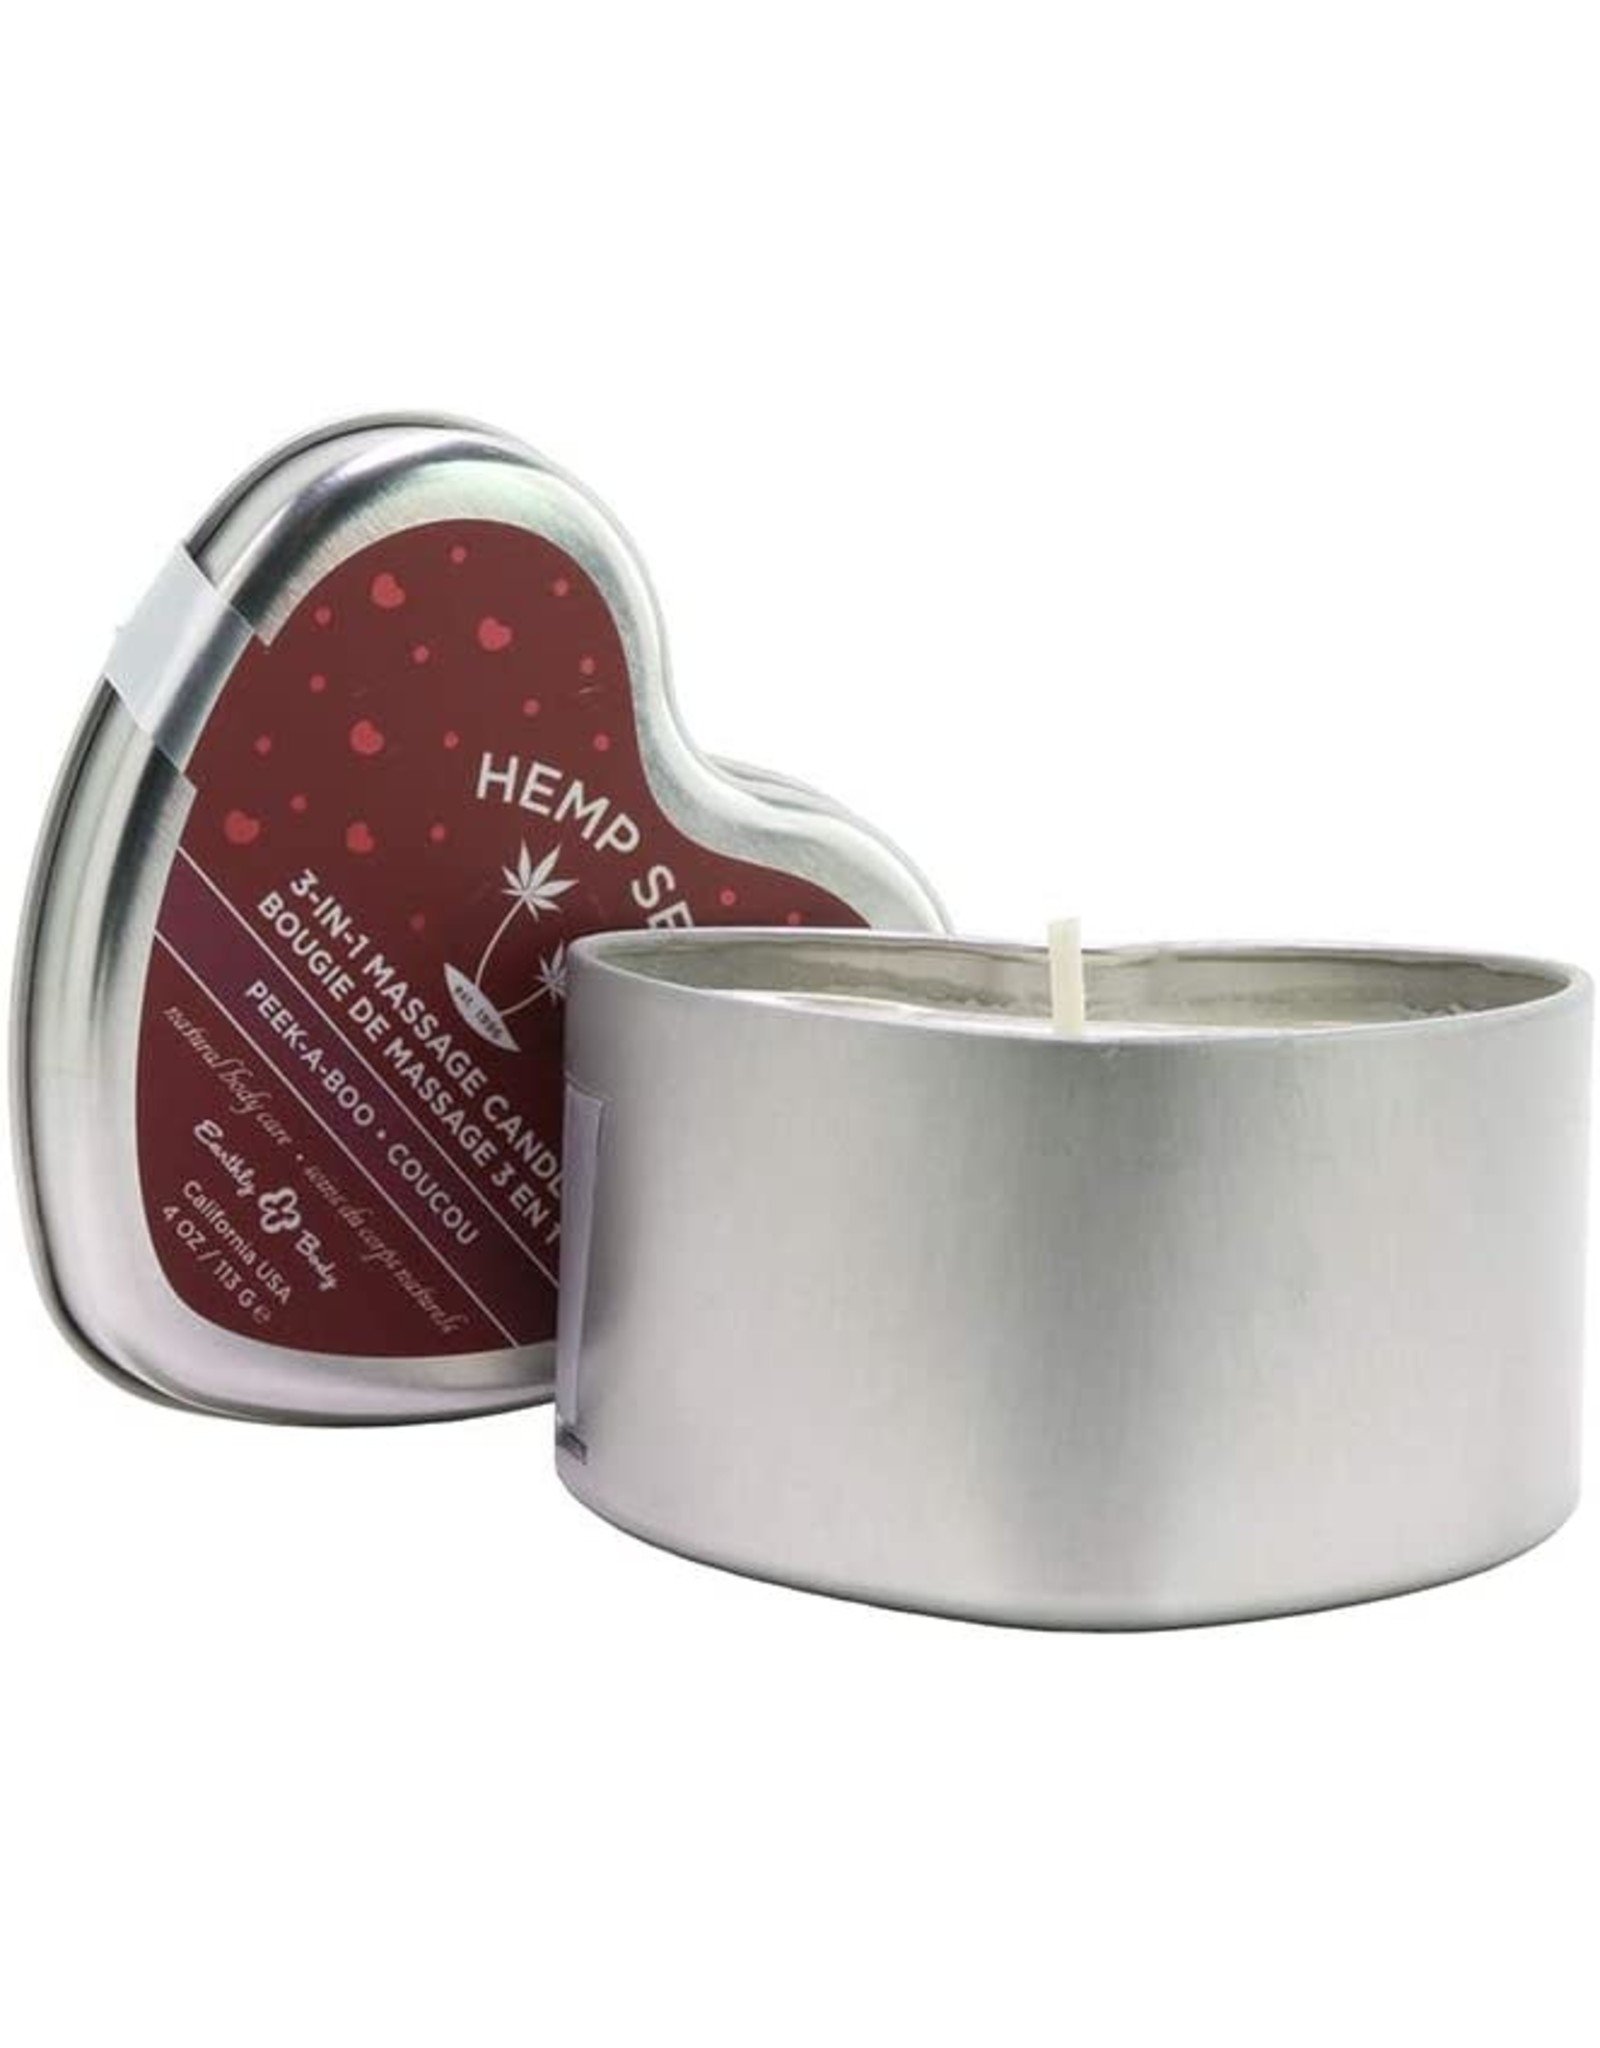 EARTHLY BODY Earthly Body Massage Oil Candle Peek-A-Boo